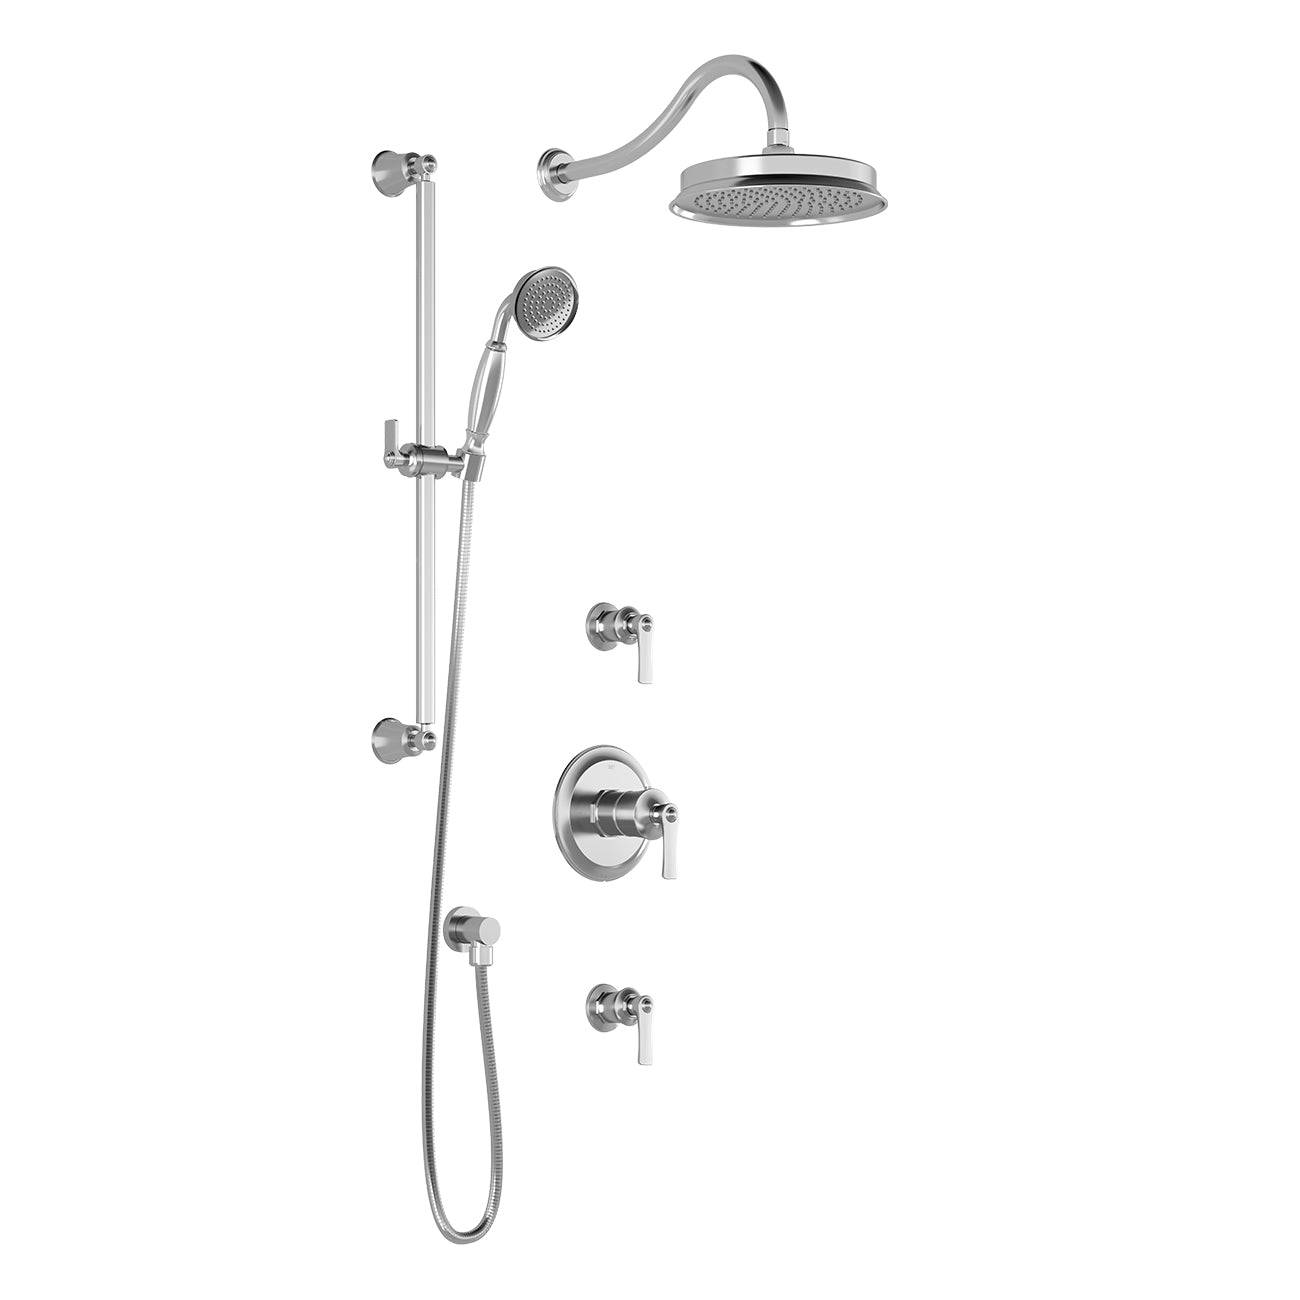 Kalia RUSTIK T2 AQUATONIK T/P Shower System with 9" Round Shower Head and Hand Shower and Wall Arm- Chrome